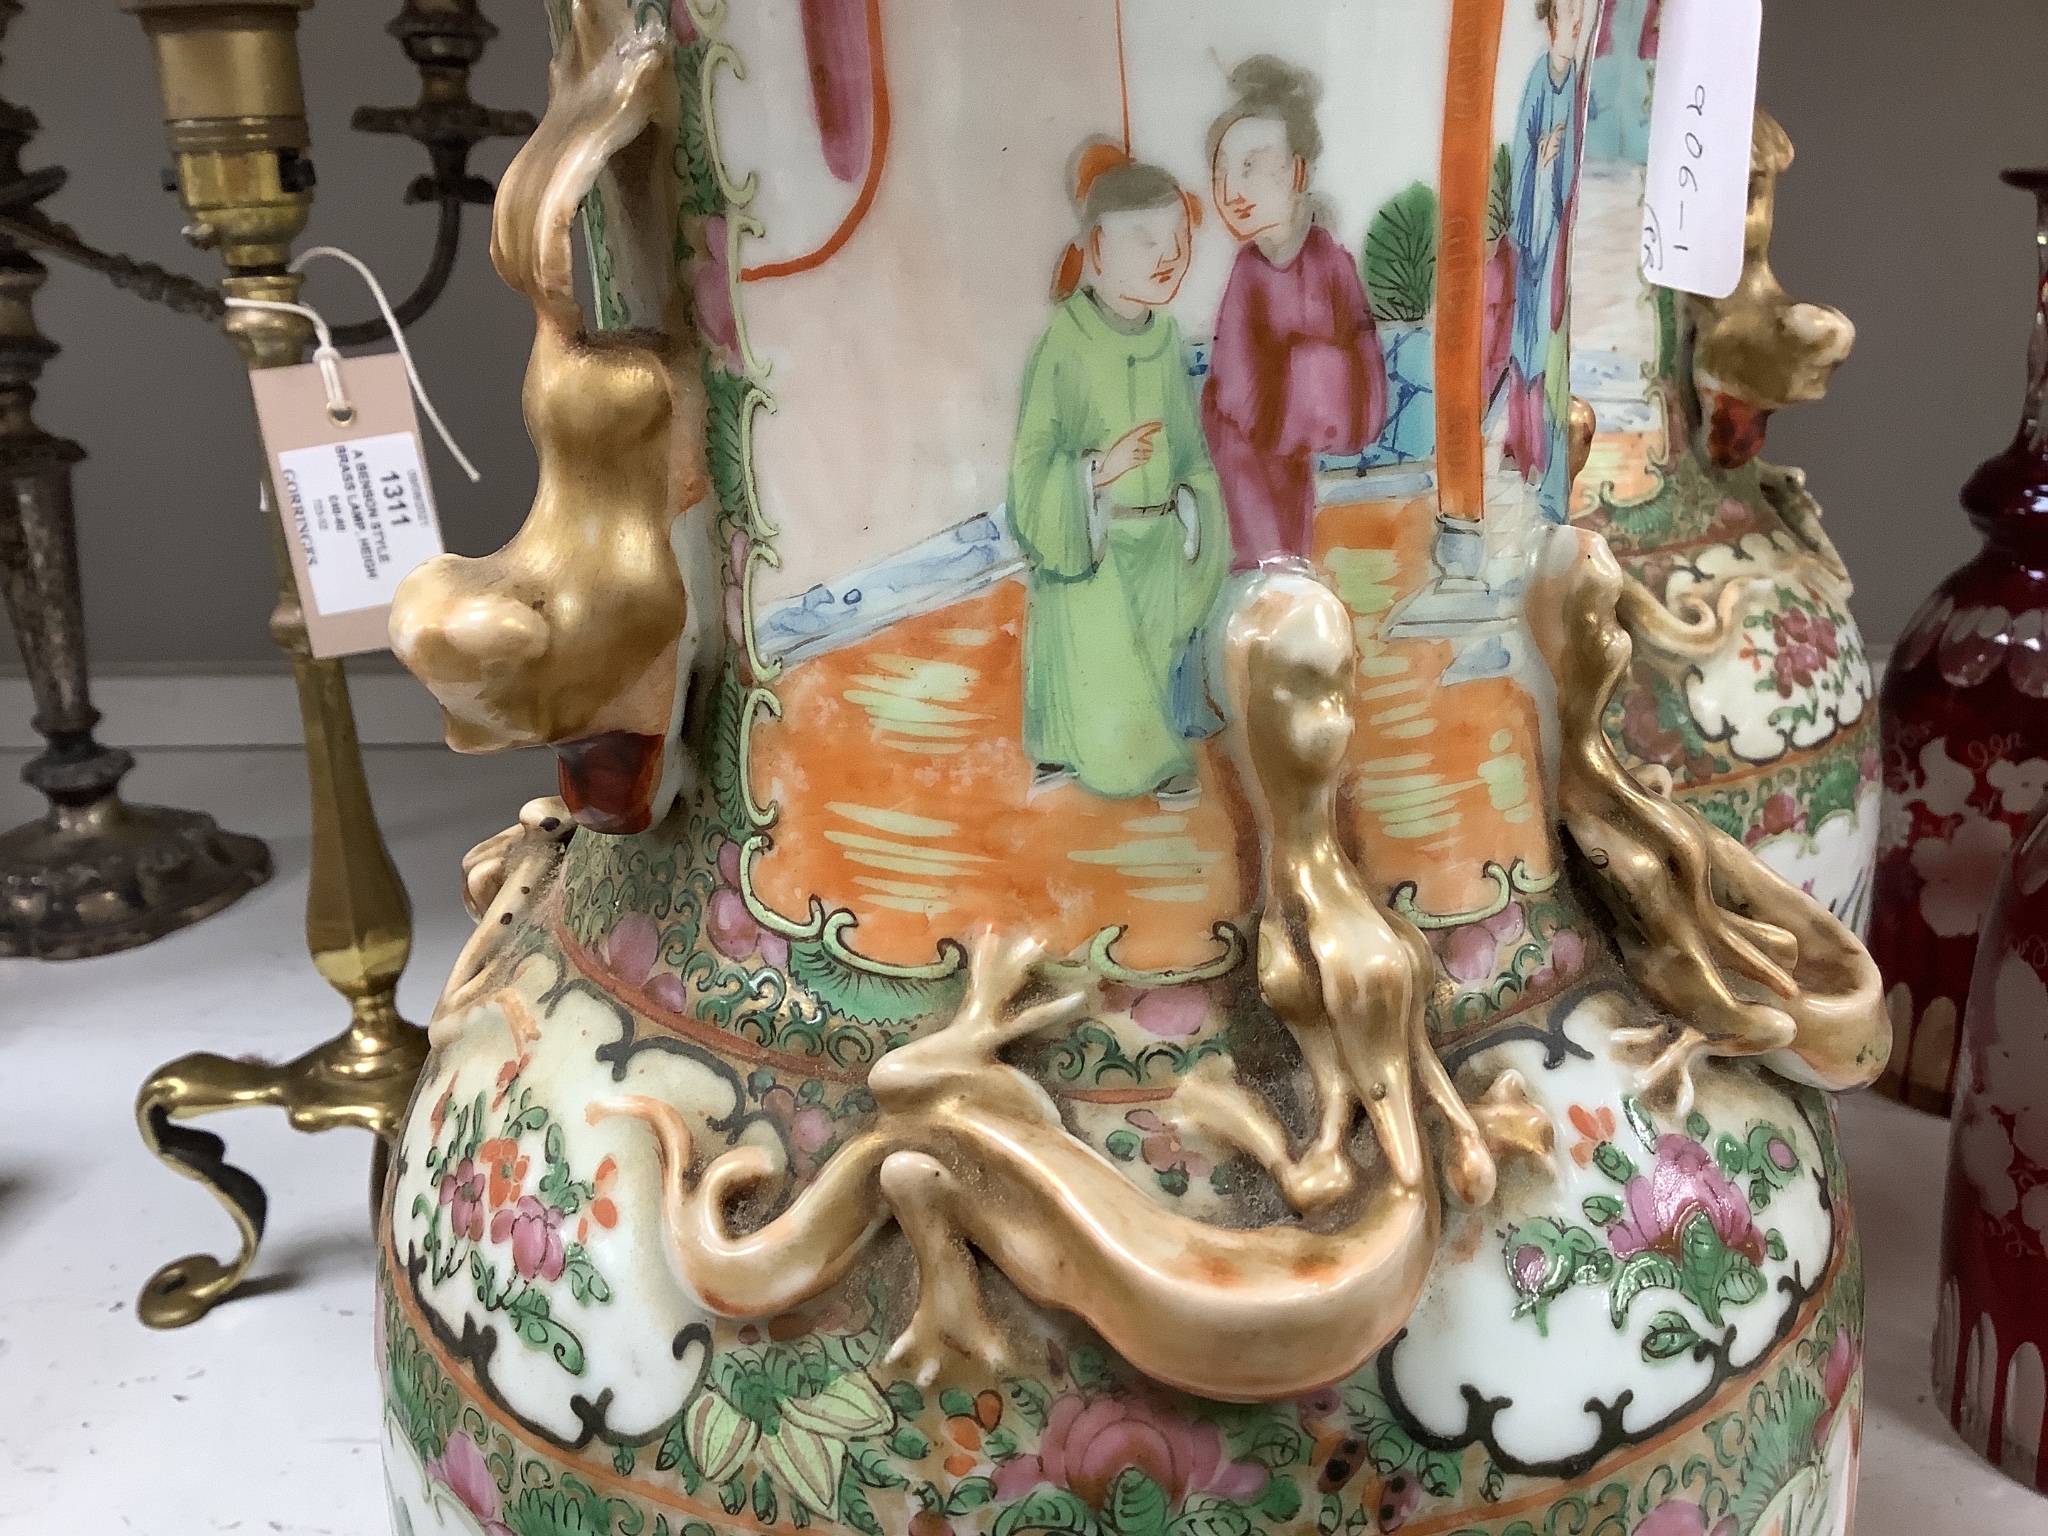 A pair of 19th century Chinese famille rose vases, height 36cm